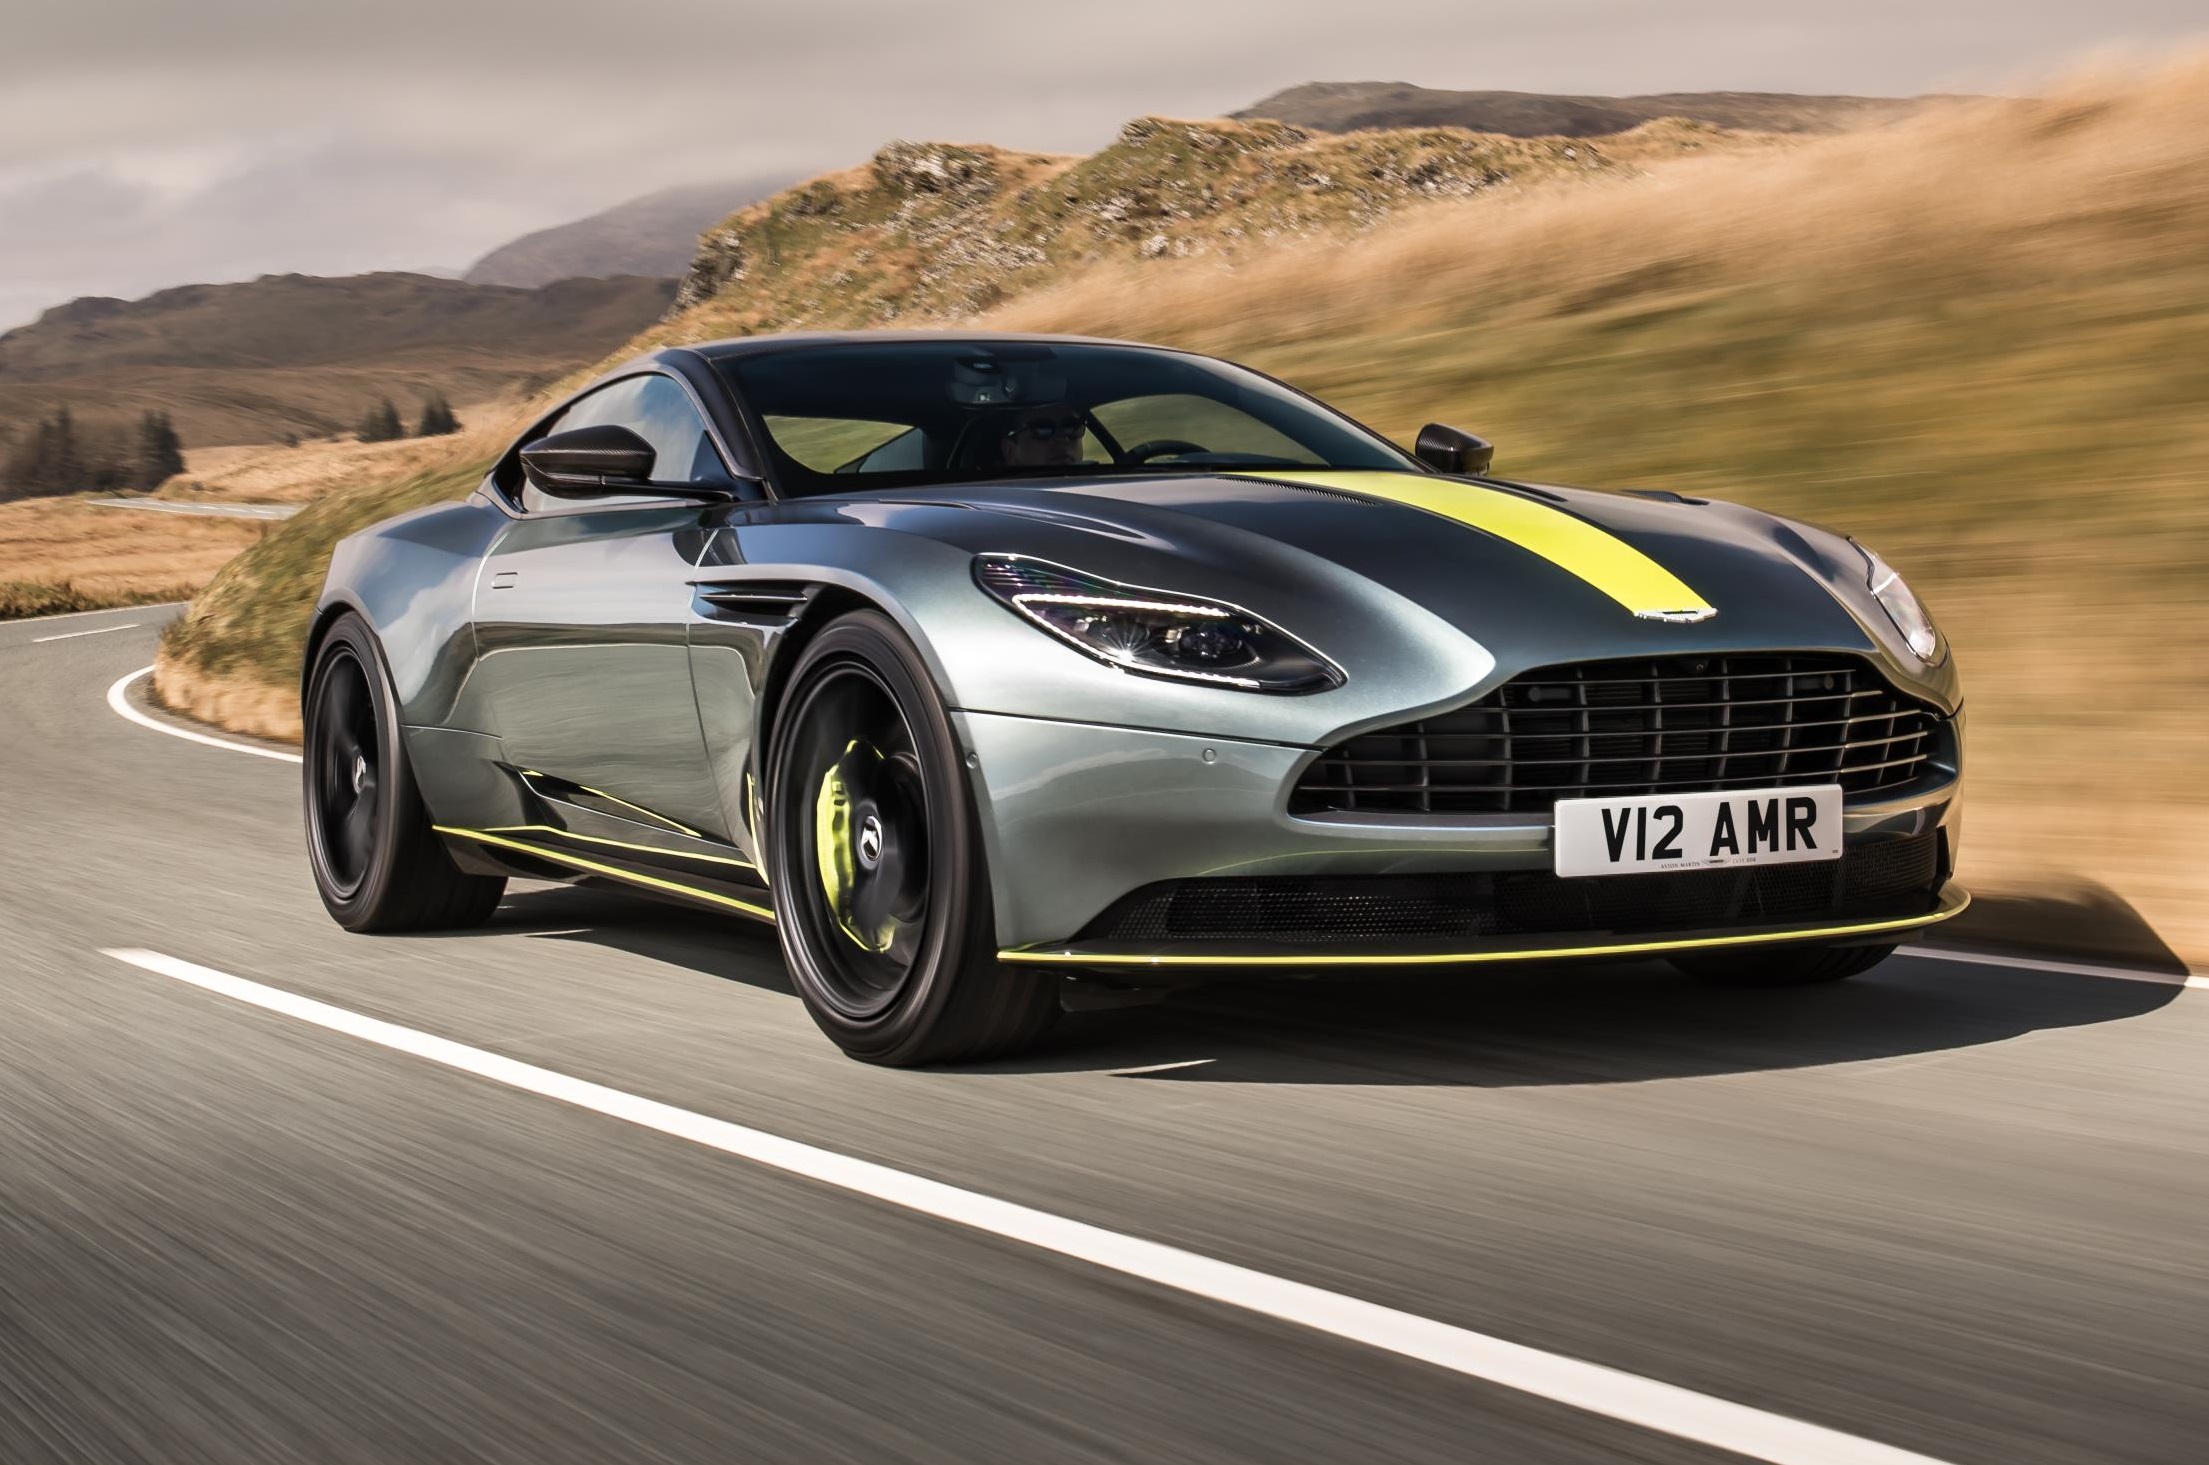 Watch: Aston Martin DB11 AMR: prices & specifications